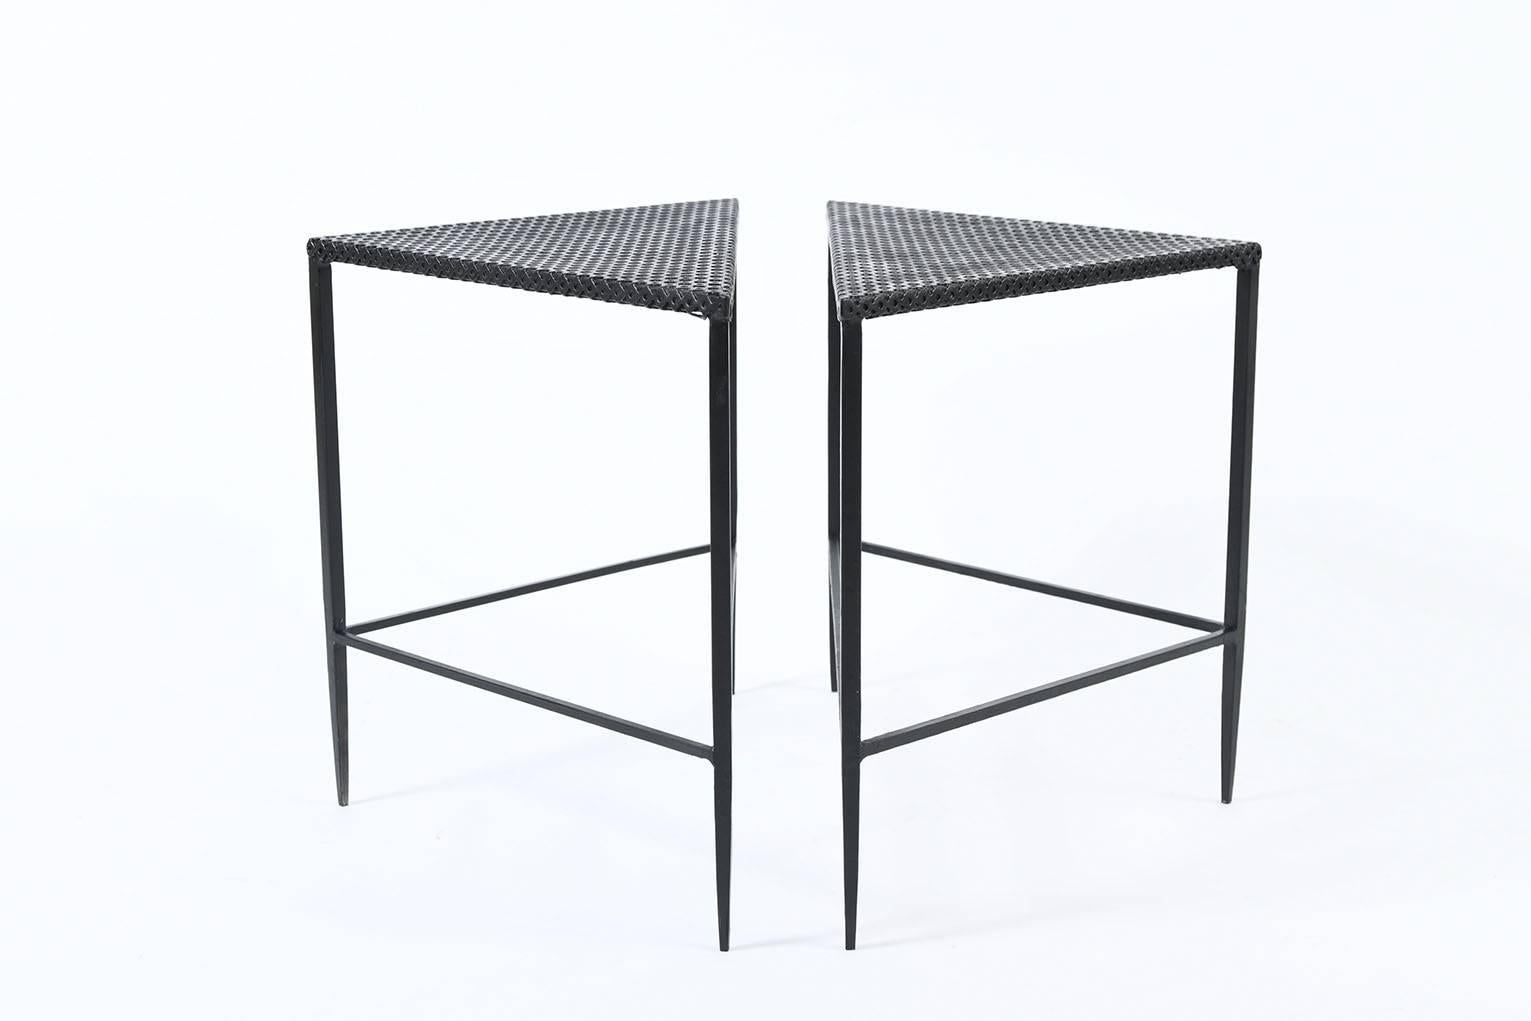 A pair of black enameled iron and rigitule two tiered triangular side tables, on tapered legs, in the manner of Mathieu Mategot (1910-2001)
France, circa 1955.